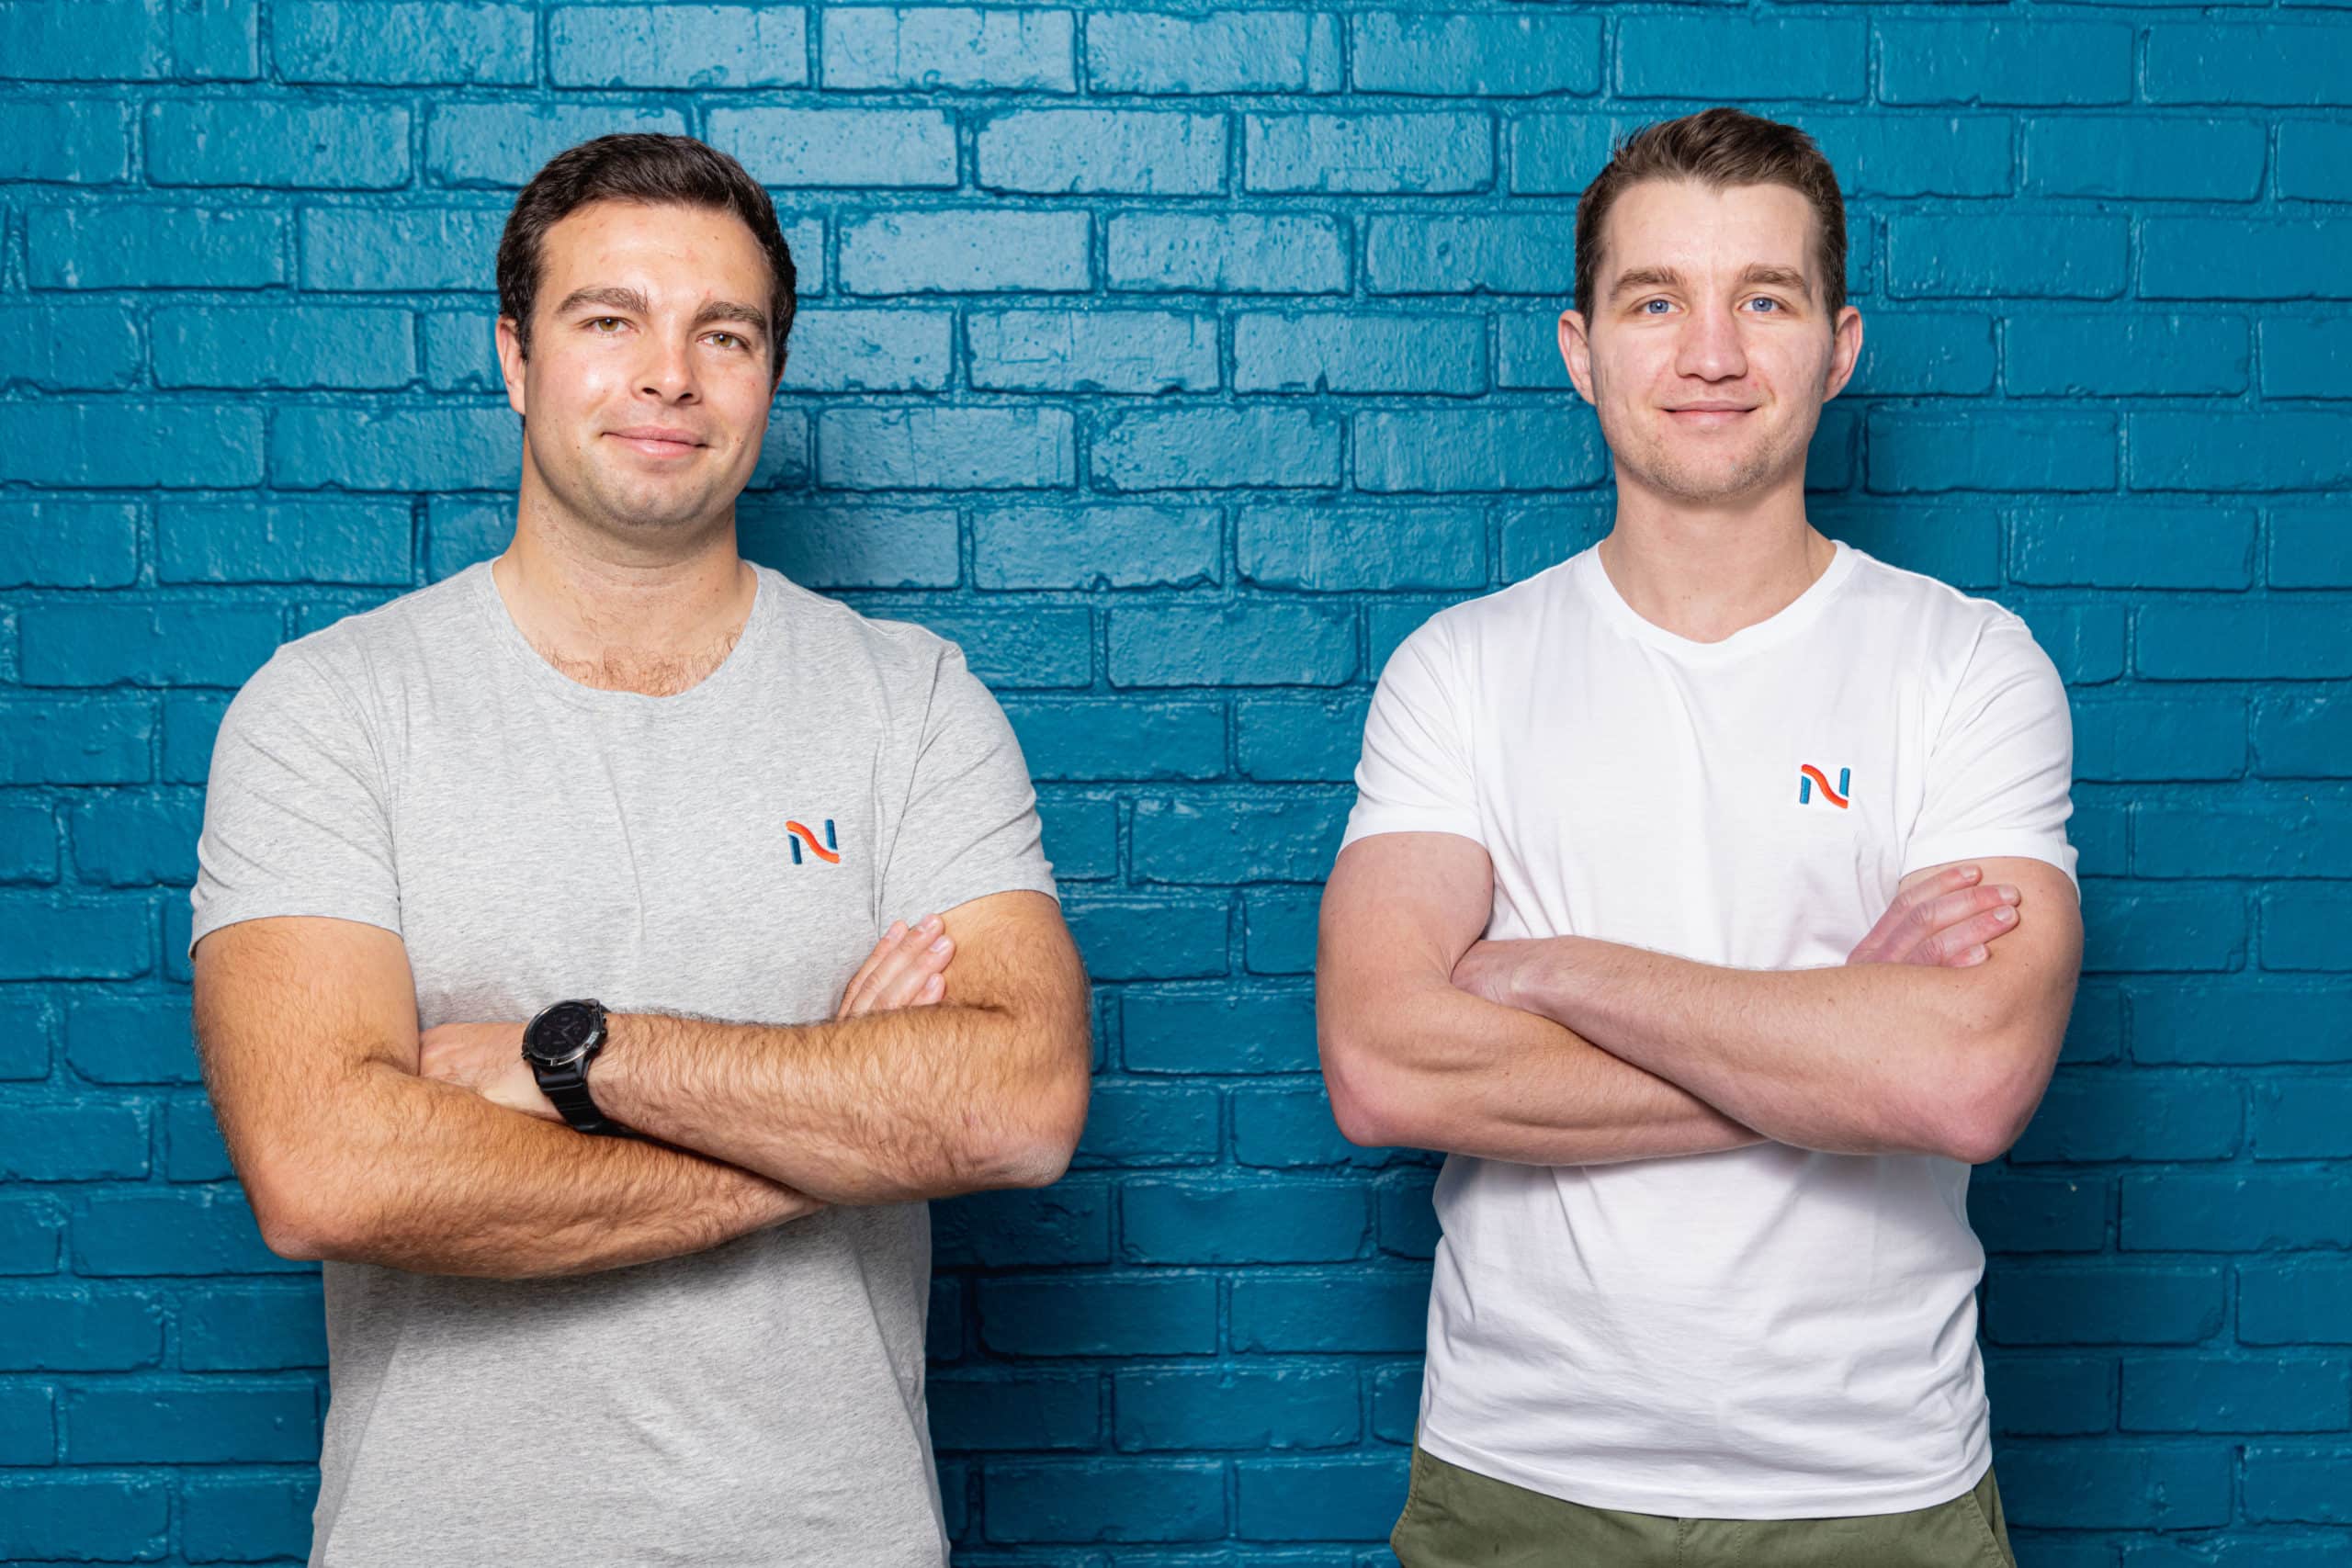 Nile co-founders Eugene Roodt and Louis de Kock